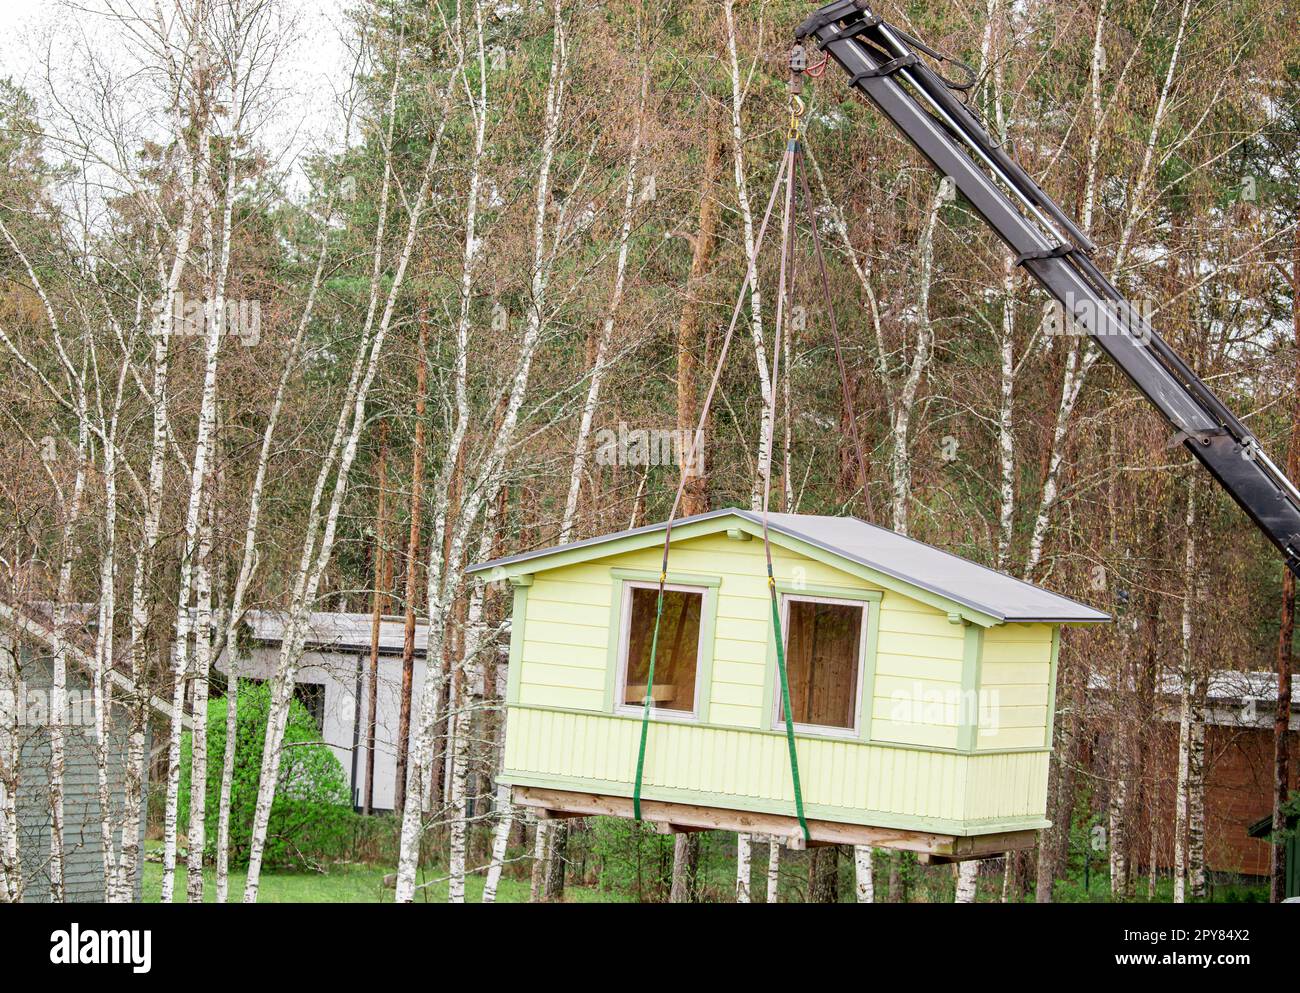 Crane lifting up the tiny house outdoors in spring in nature. Stock Photo